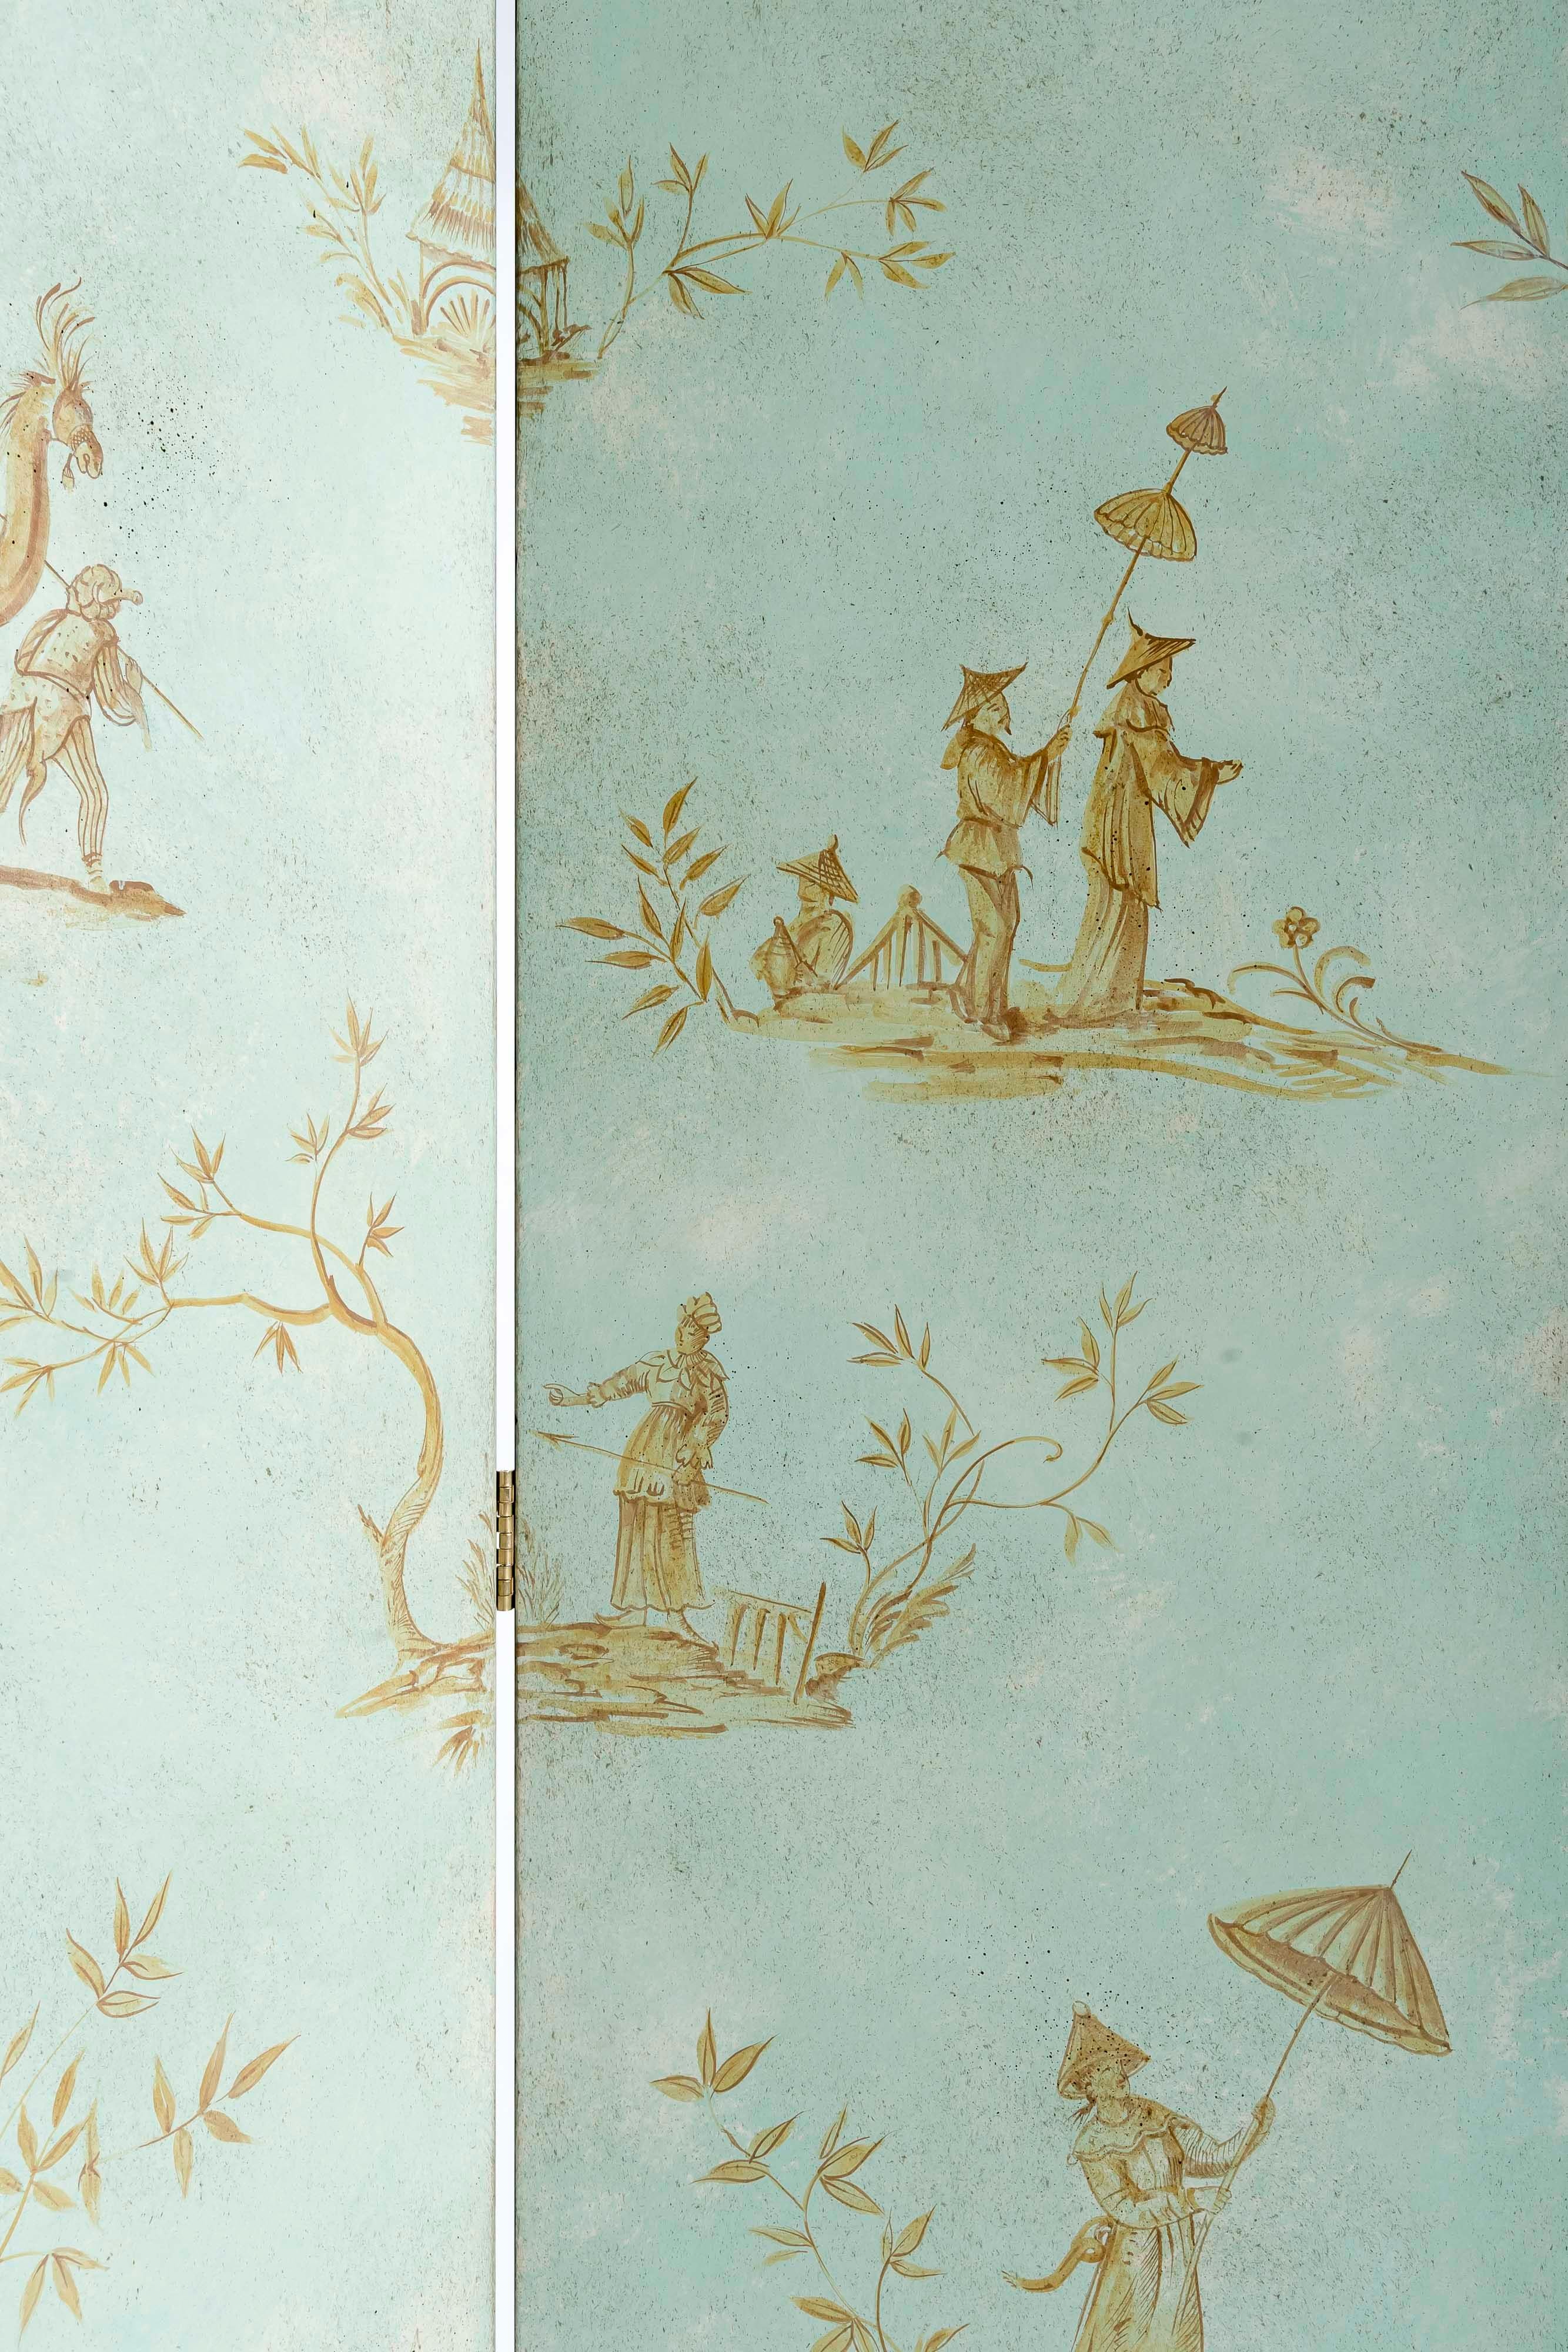 From our Hand-Painted Furniture Collection, we are pleased to introduce you to our aquamarine otello screen with ochre chinoiserie vignettes. 
A hand-painted screen evokes the luxury of 18th century Venetian style. Composed of a custom number of